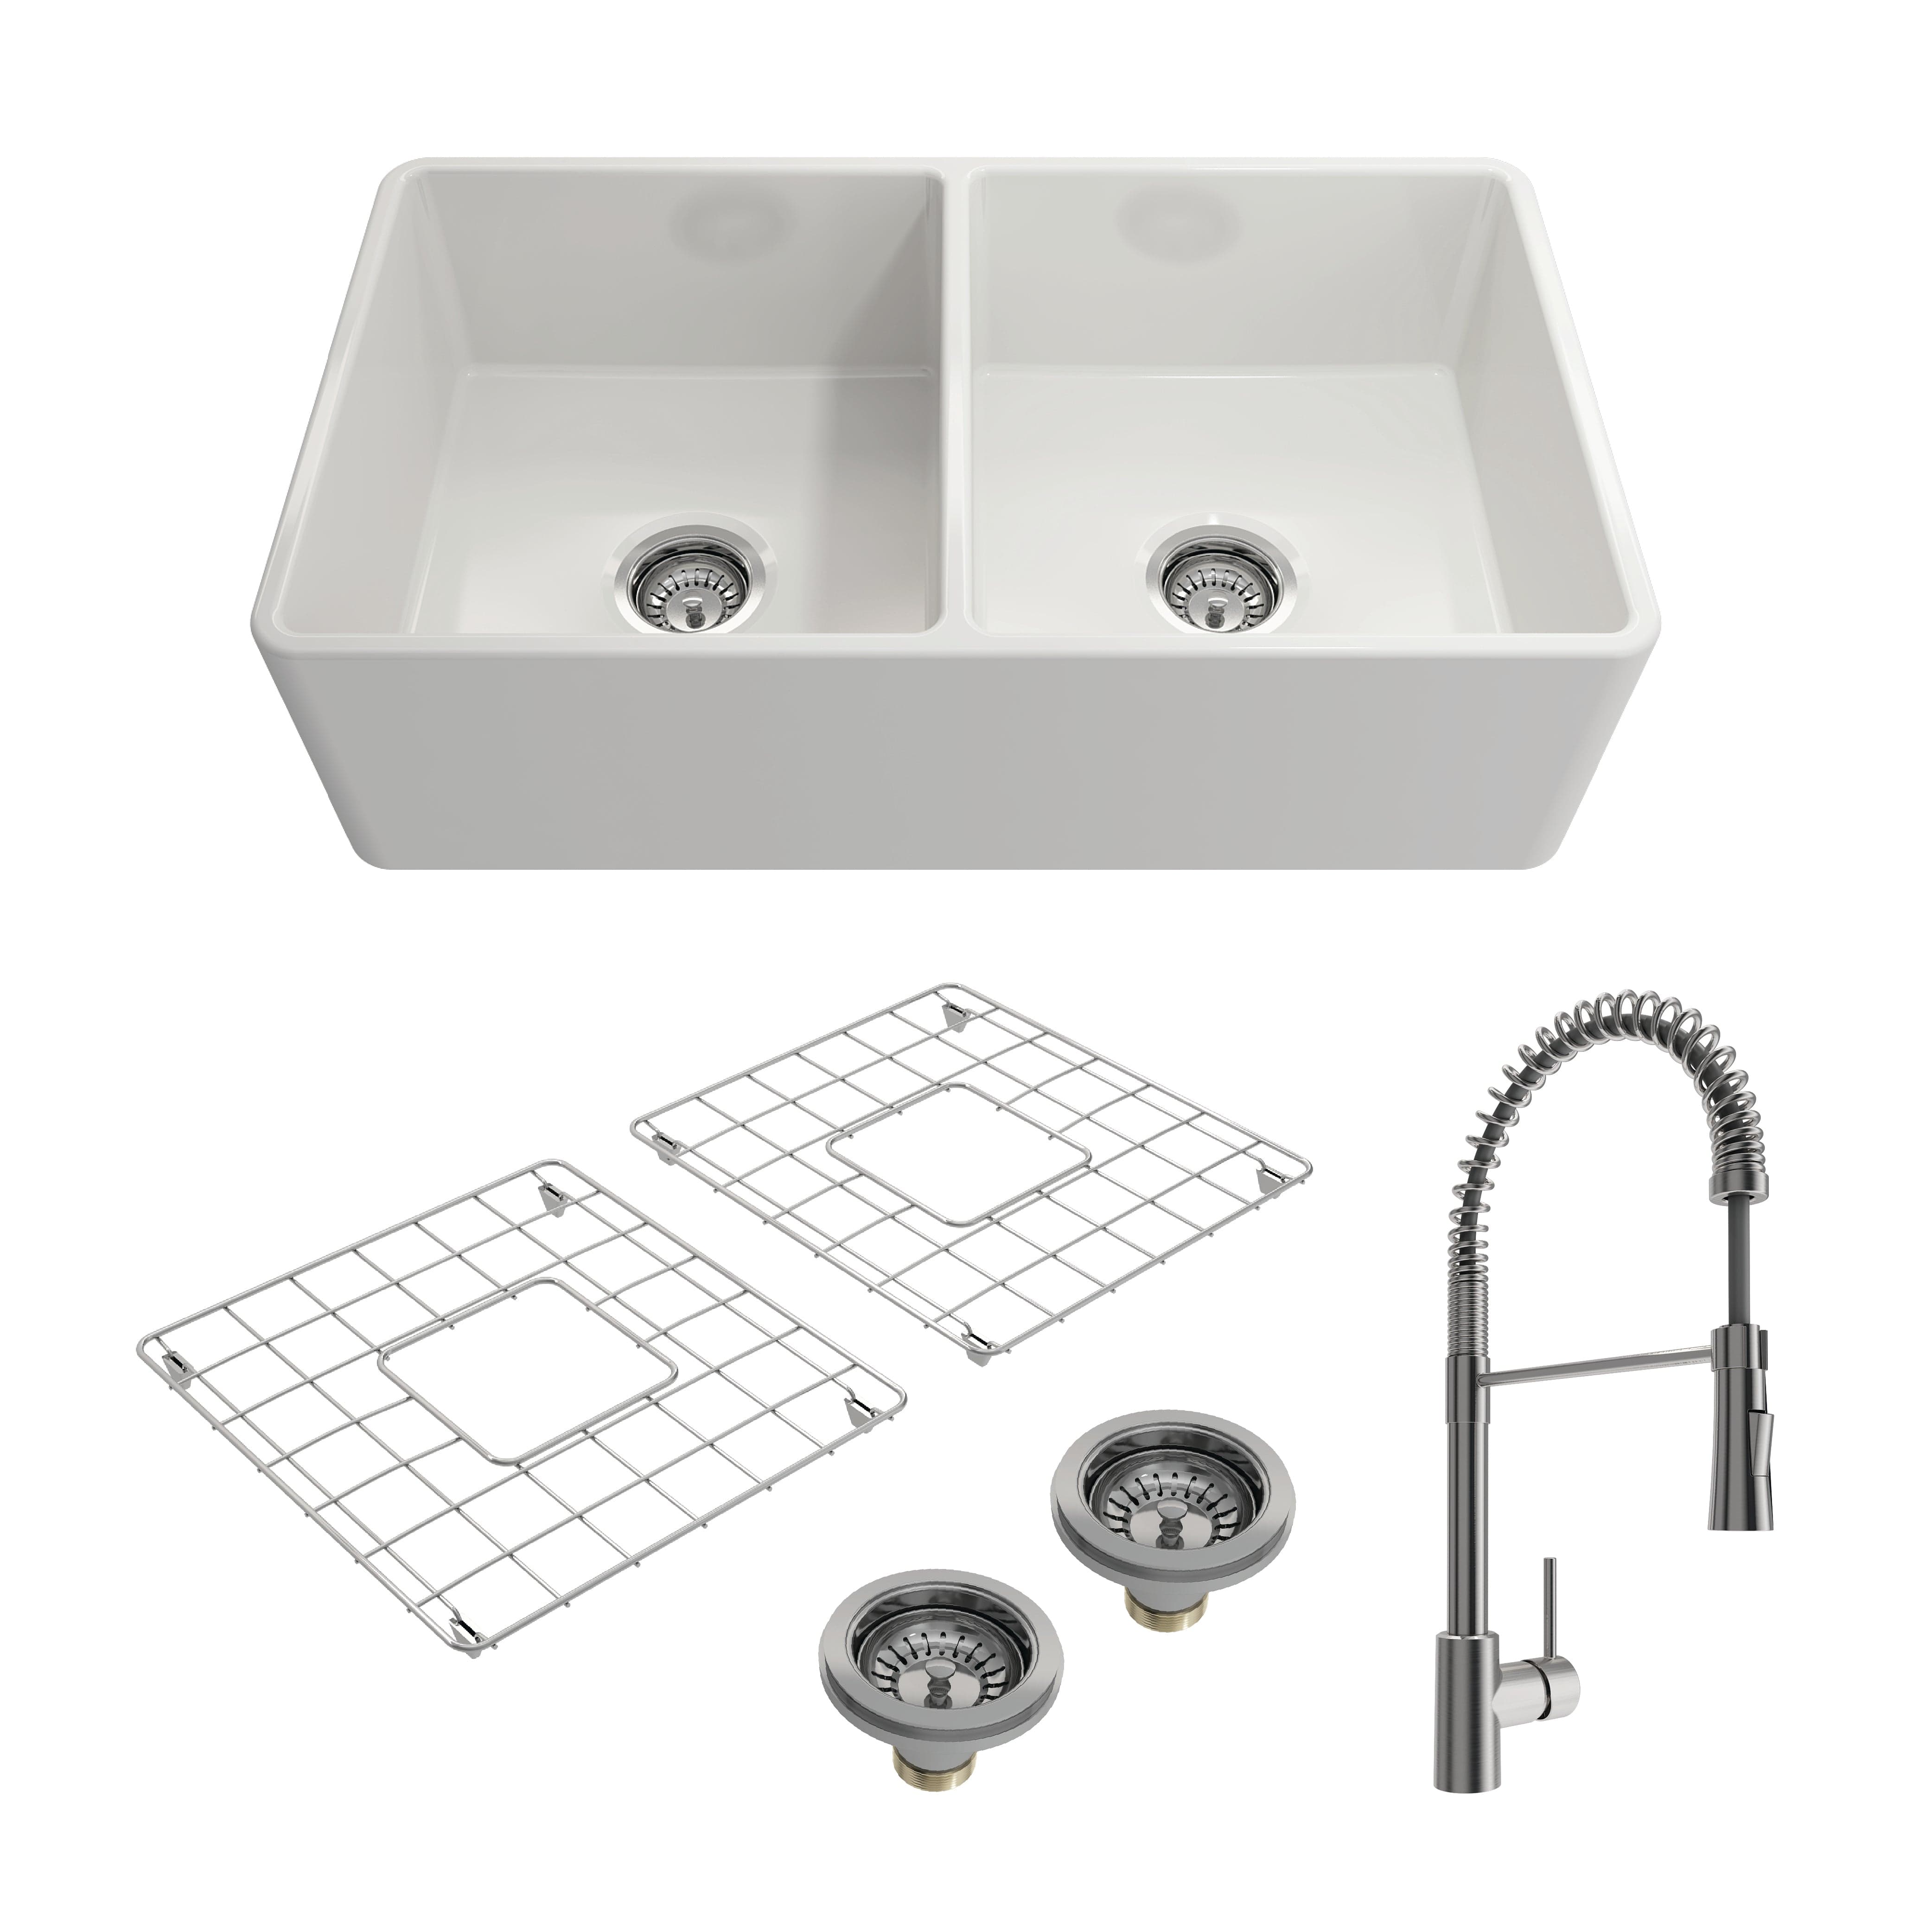 BOCCHI CLASSICO 33" Fireclay Kitchen Sink with Protective Bottom Grids and Strainers with Livenza 2.0 Faucet